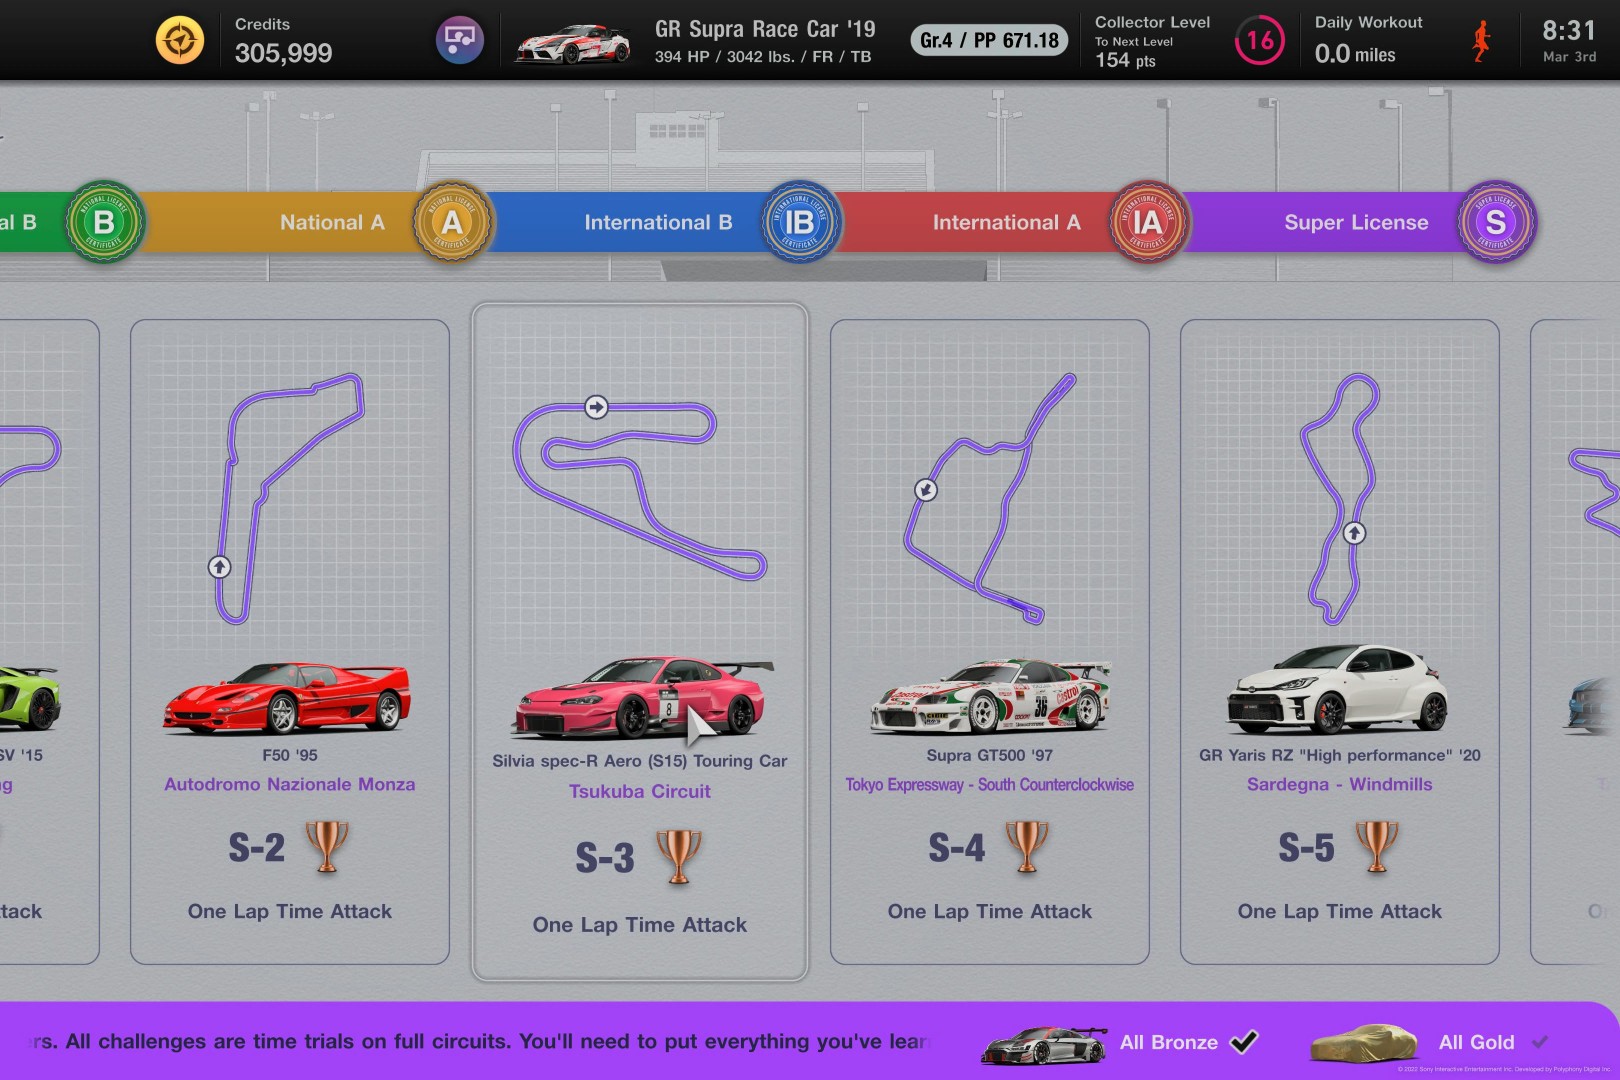 How to raise and lower PP in Gran Turismo 7